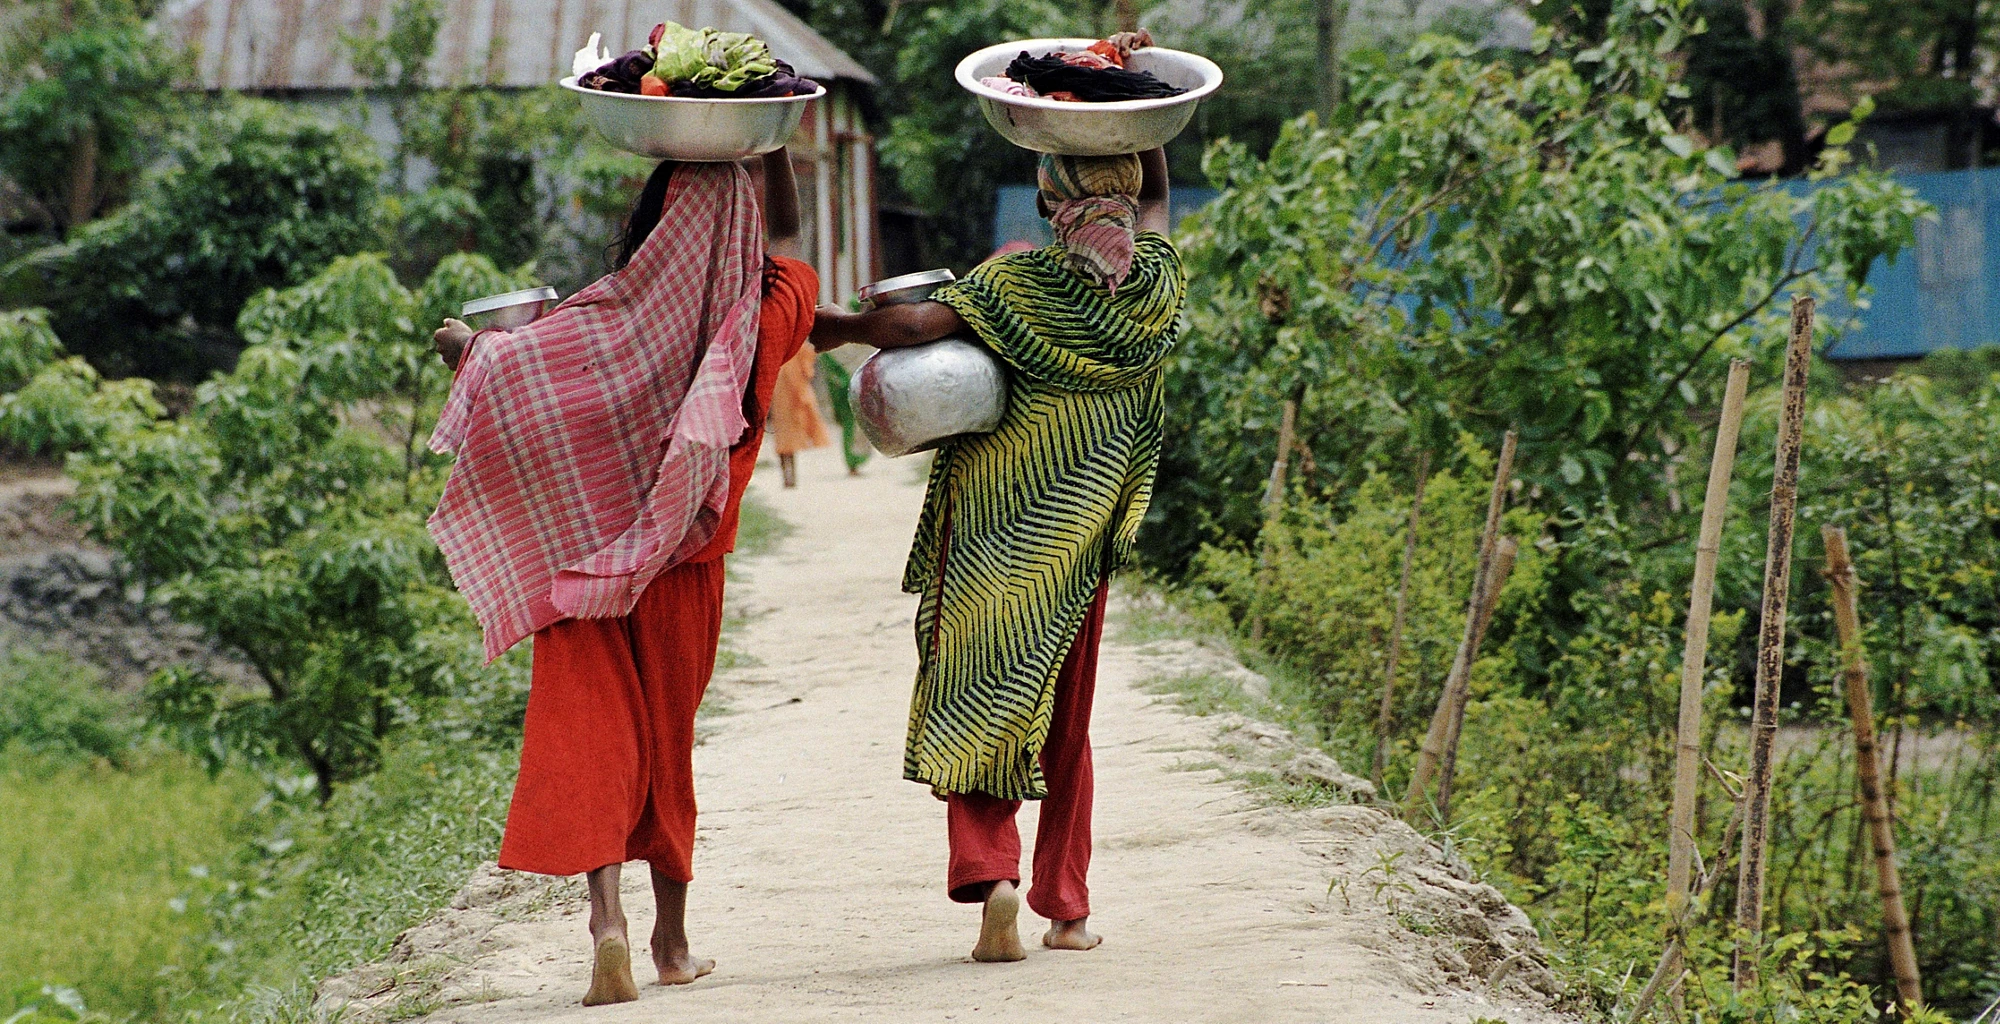 Two women carry clothing, produce, and water jugs in Bangladesh.